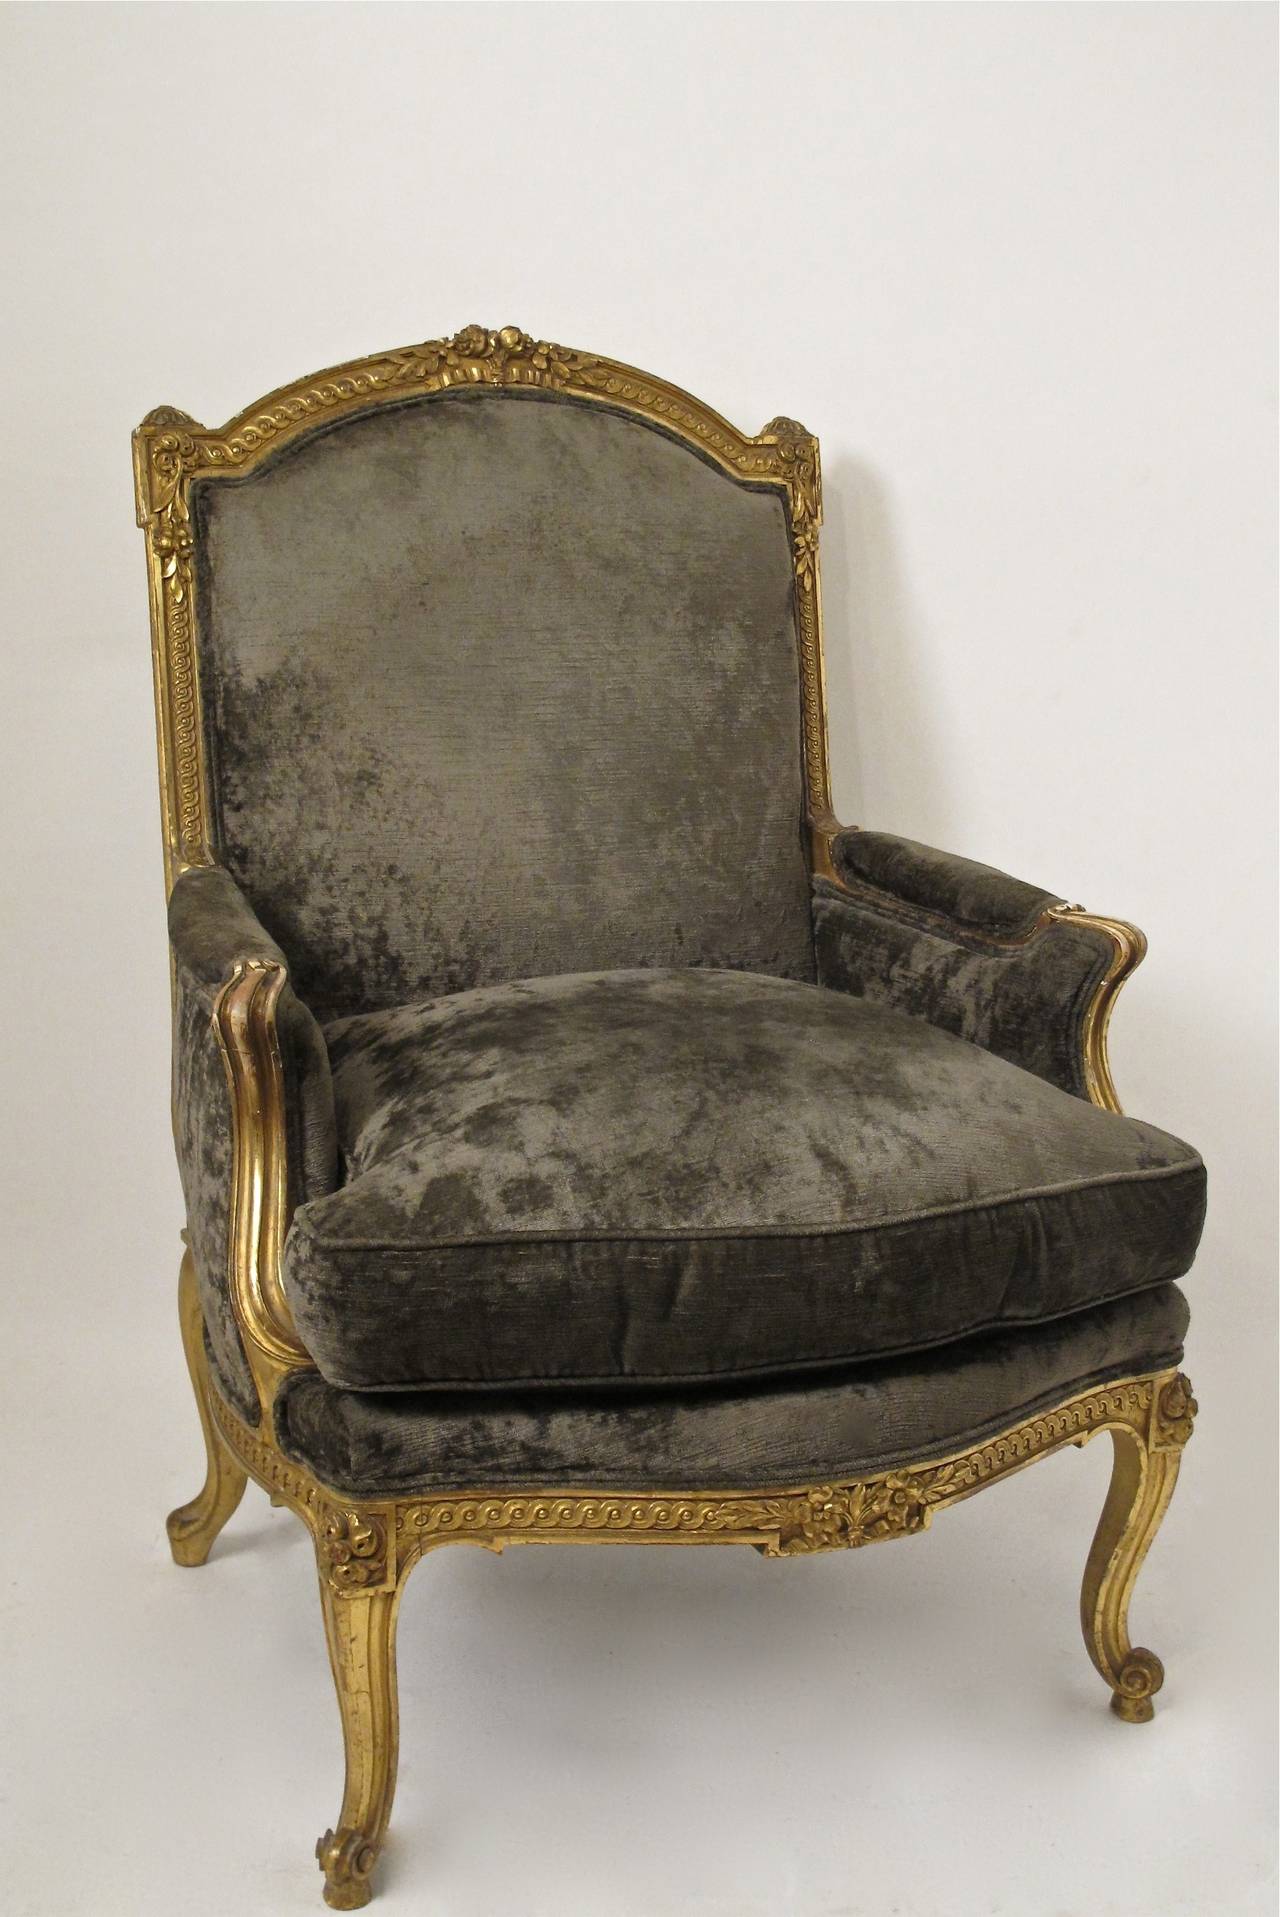 Well proportioned gilt and hand carved bergere chair with cotton velvet upholstery and with raised carved floral detailing on the backrest and legs. Frame is strong and tight, upholstery is in good condition, gilt finish showing signs of wear and